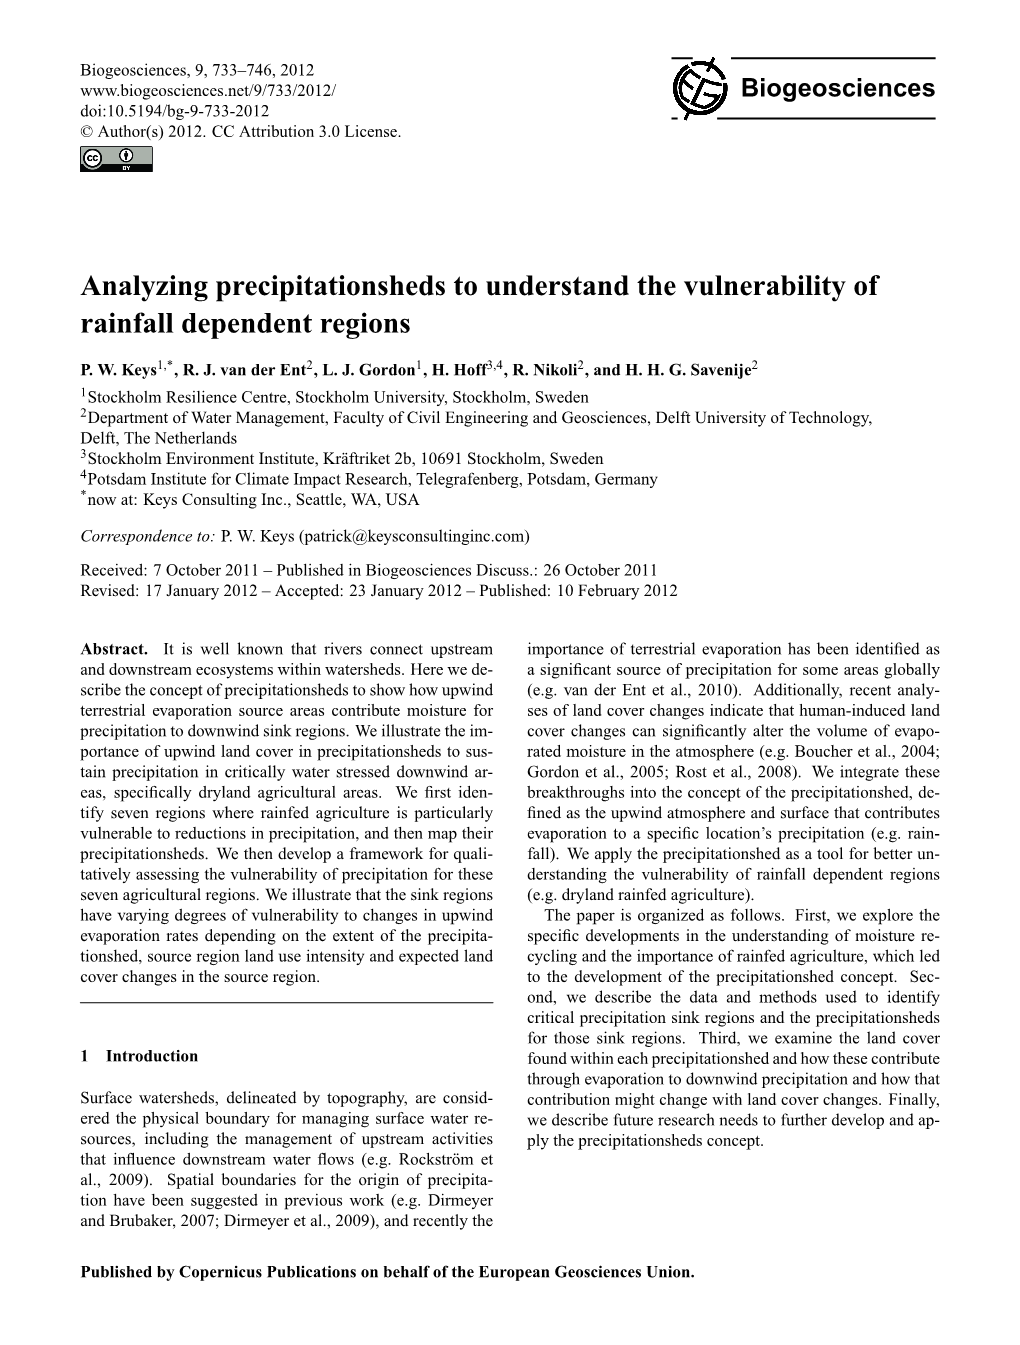 Analyzing Precipitationsheds to Understand the Vulnerability of Rainfall Dependent Regions